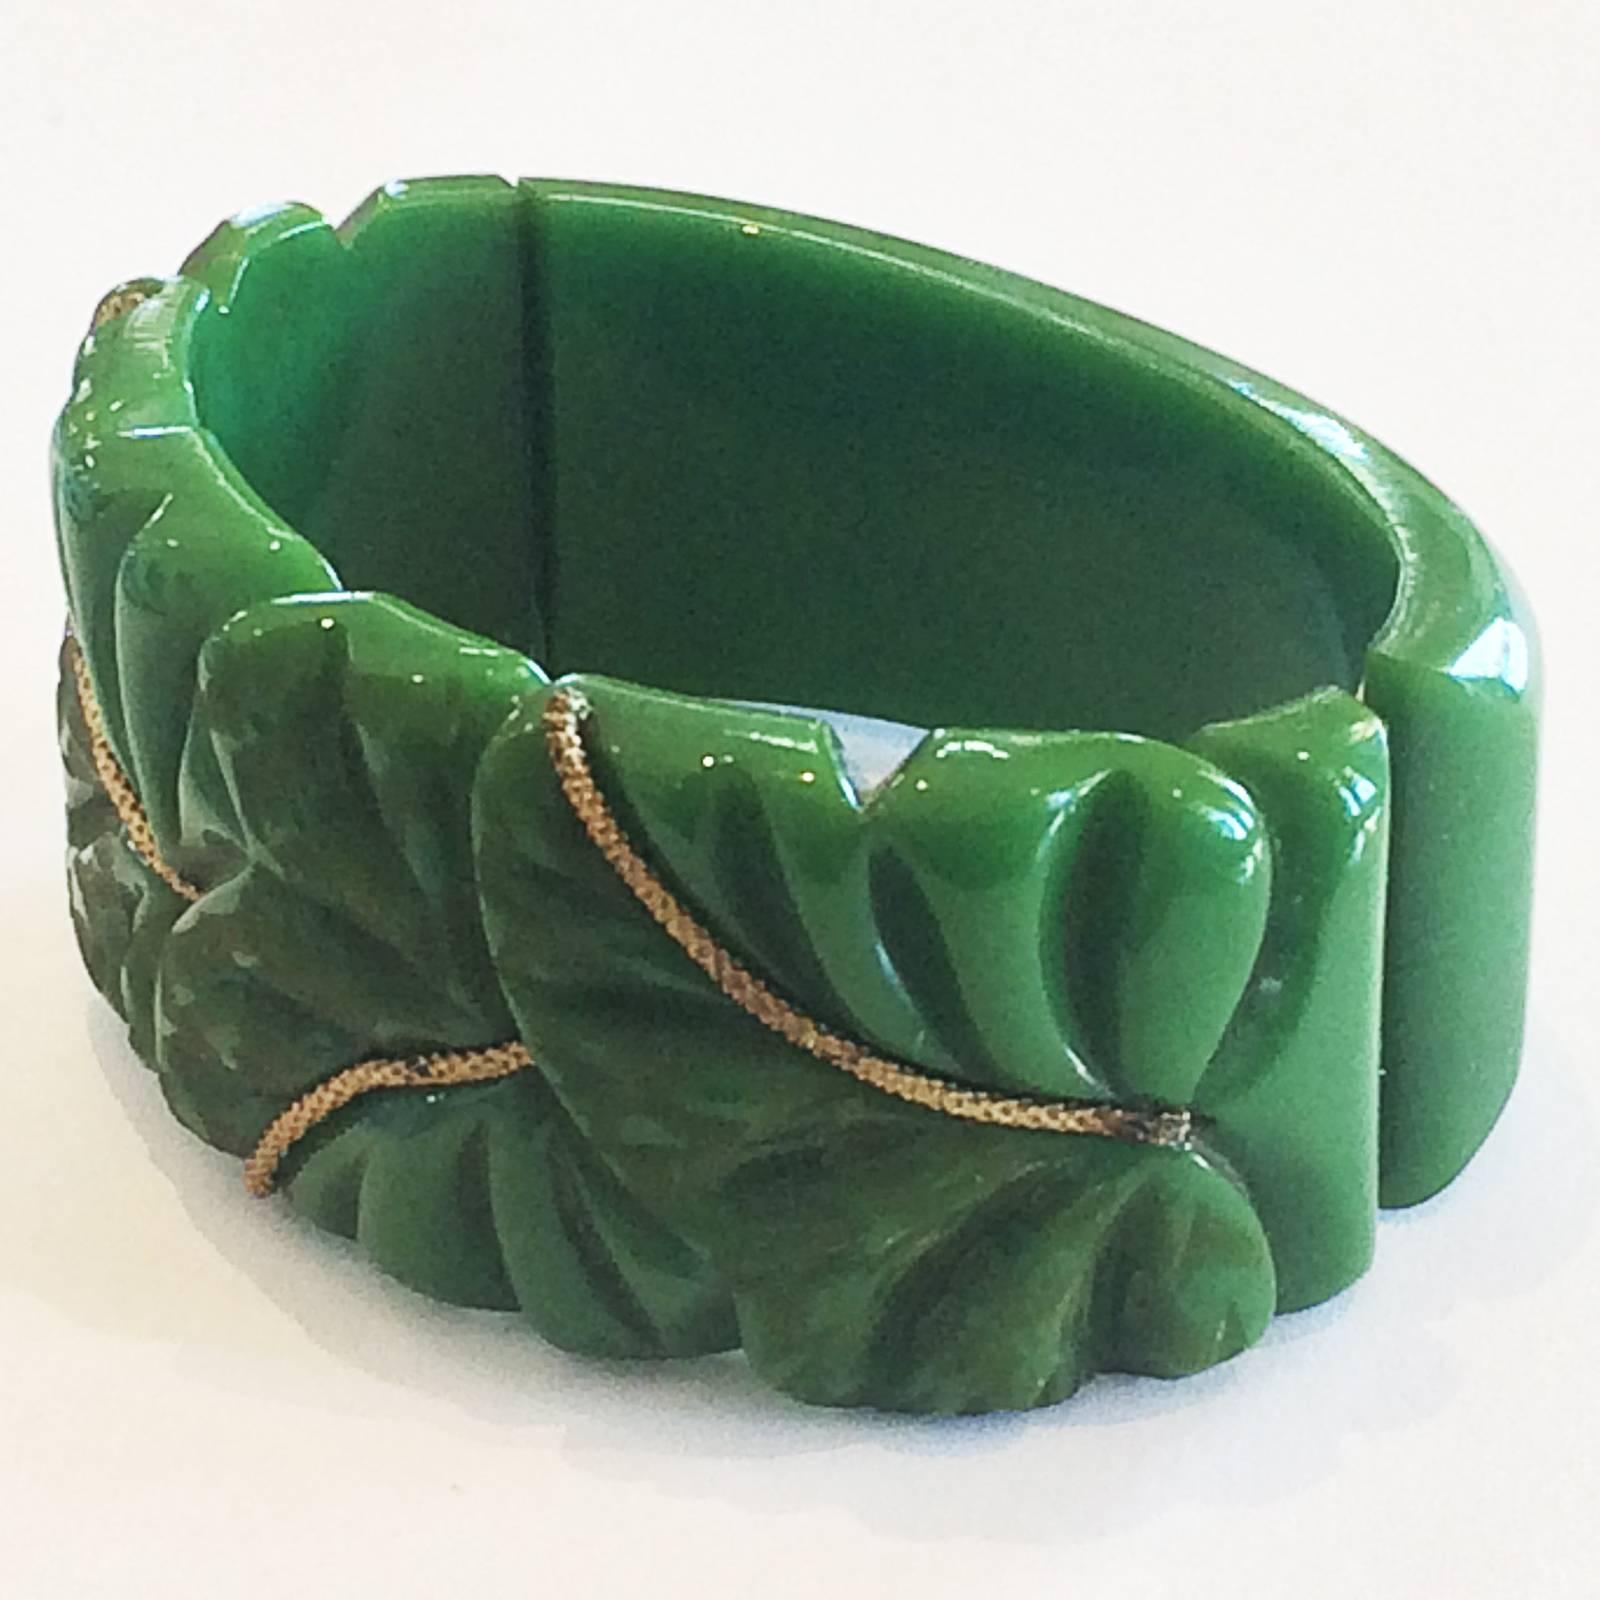 Art Deco Clamper Bangle heavily carved, mint green Bakelite in a leaf pattern, with patinated, gilt brass,  inset along each leaf centre. Original spring hinge in perfect working condition, with no damage or repairs at all to the bangle. One of the